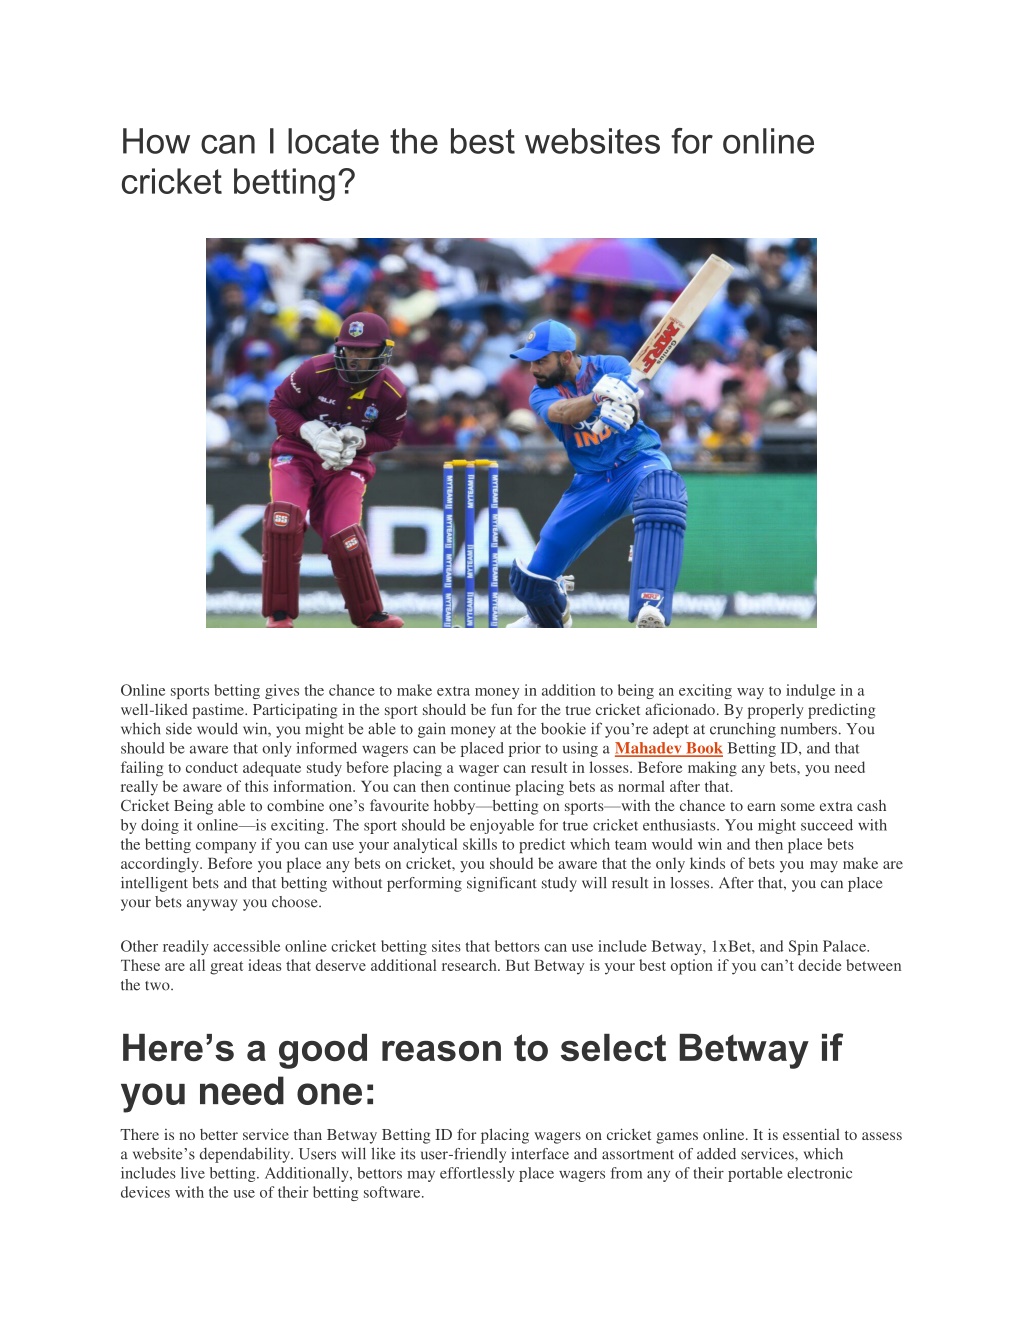 PPT - How can I locate the best websites for online cricket betting PowerPoint Presentation